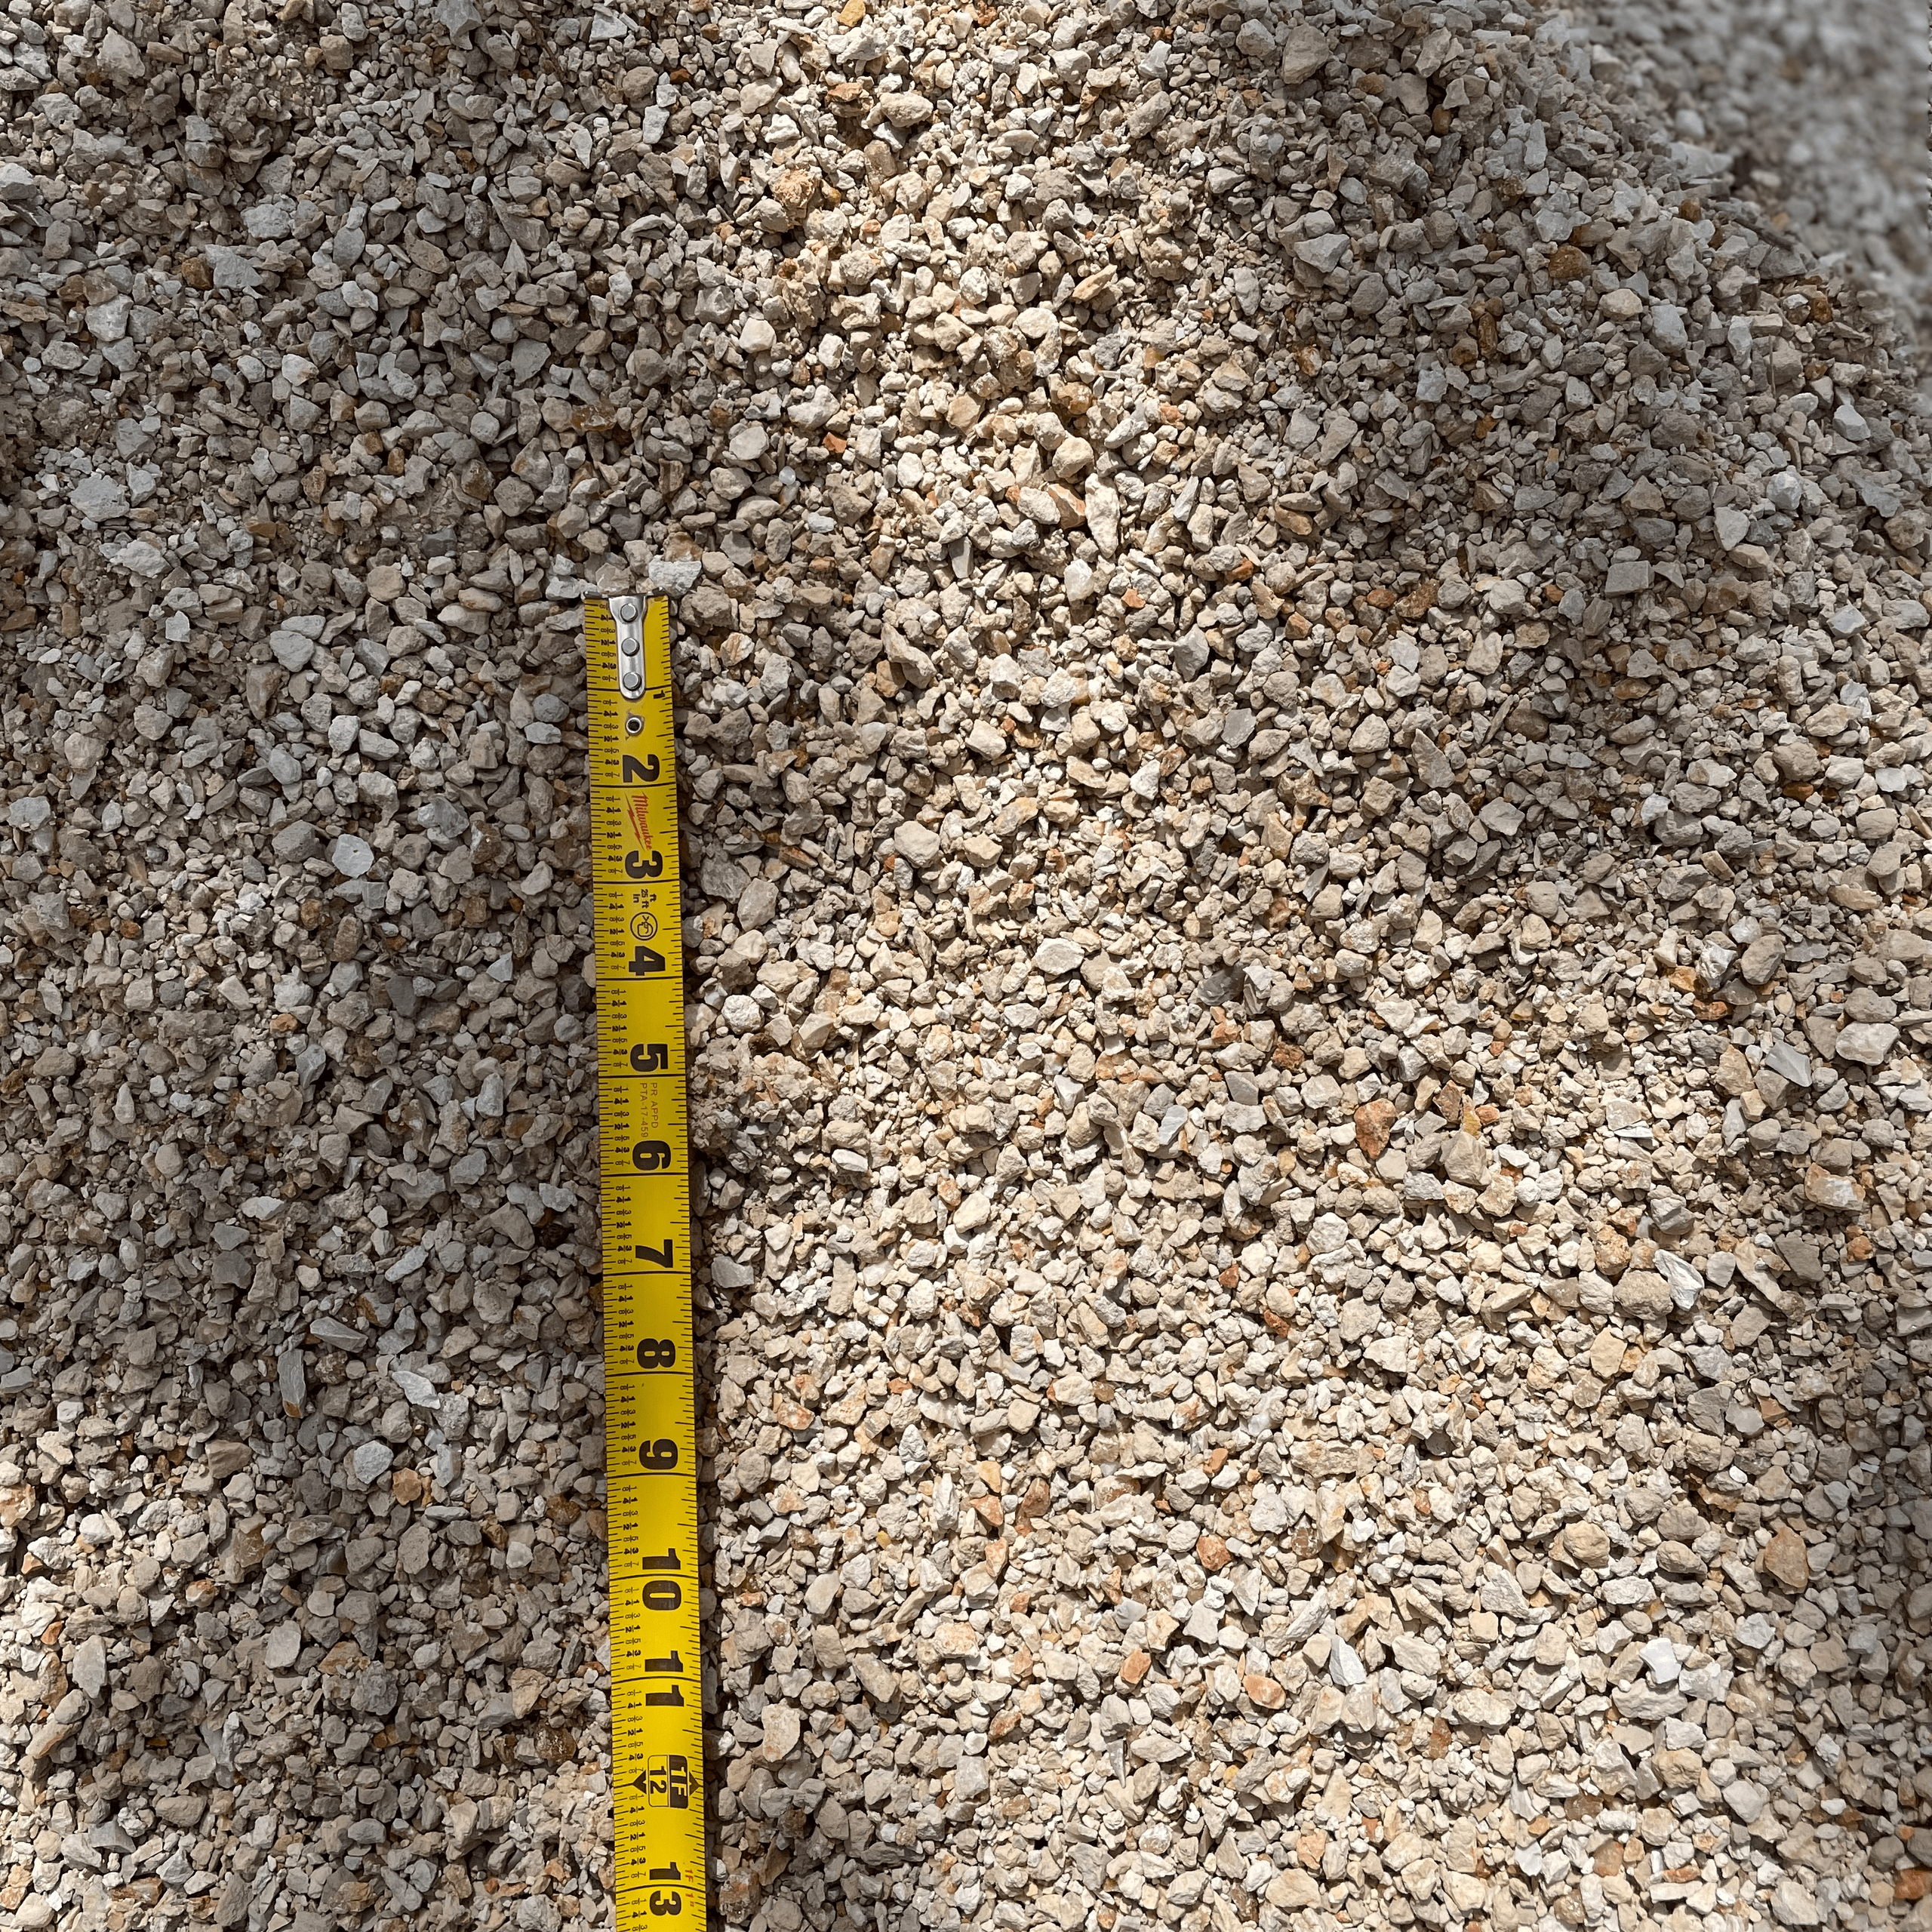 Limestone Screening Gravel for Sale and Delivery for Round Rock Texas